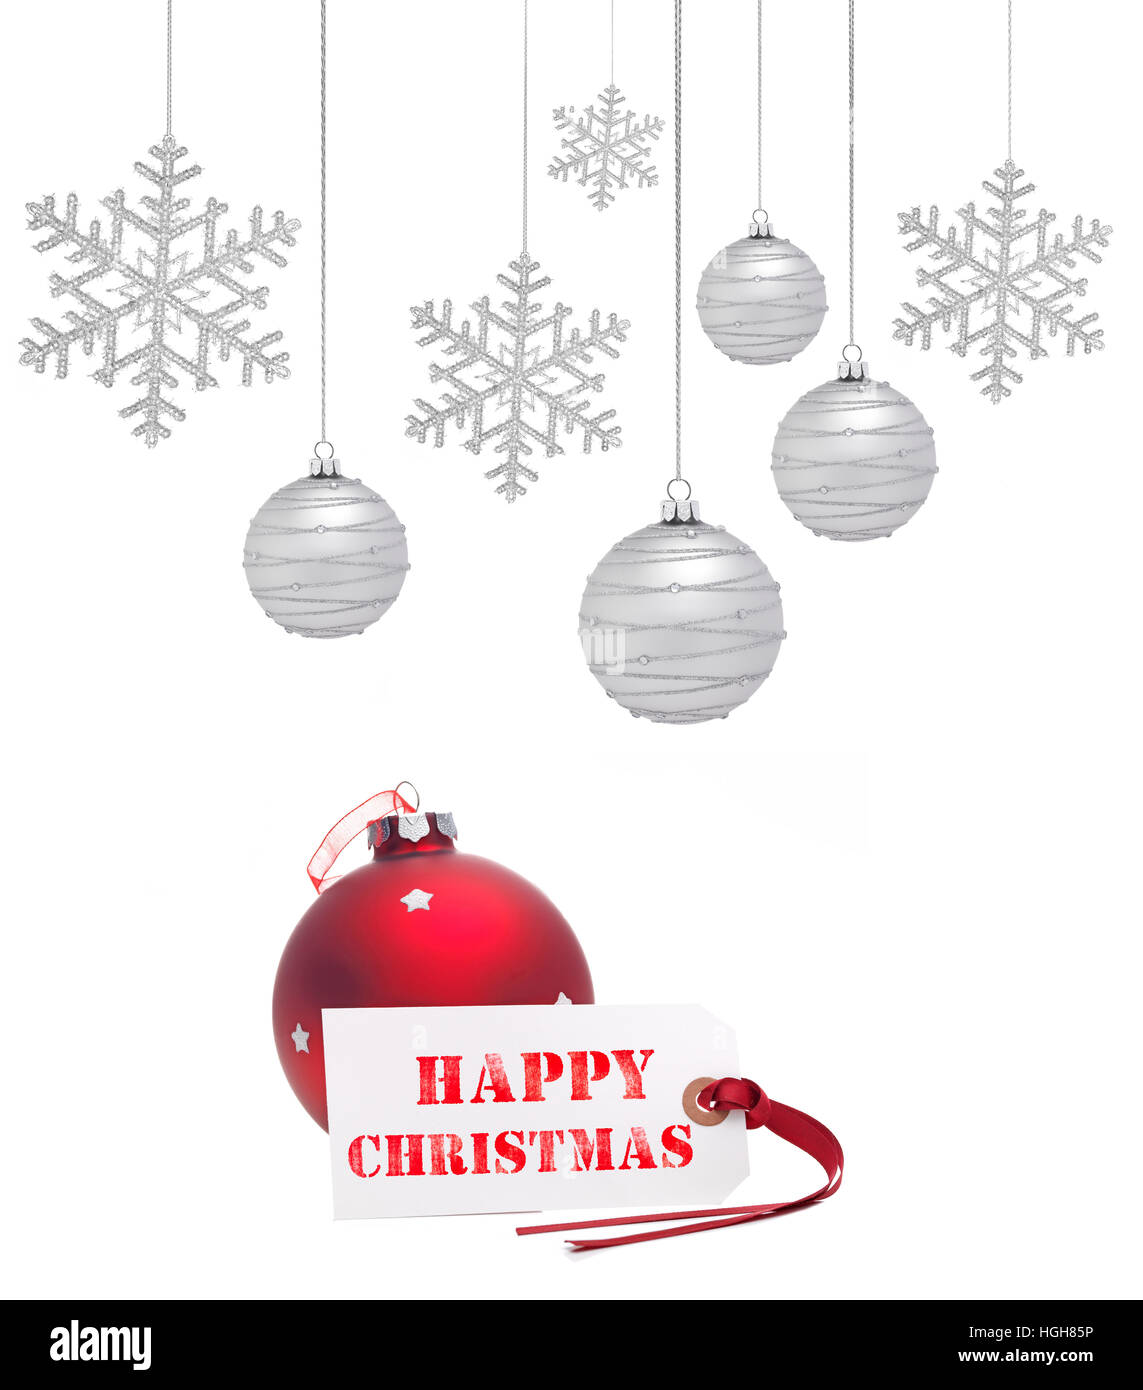 Red Christmas Bauble with space for copy and hanging snowflakes and Happy Christmas text Stock Photo